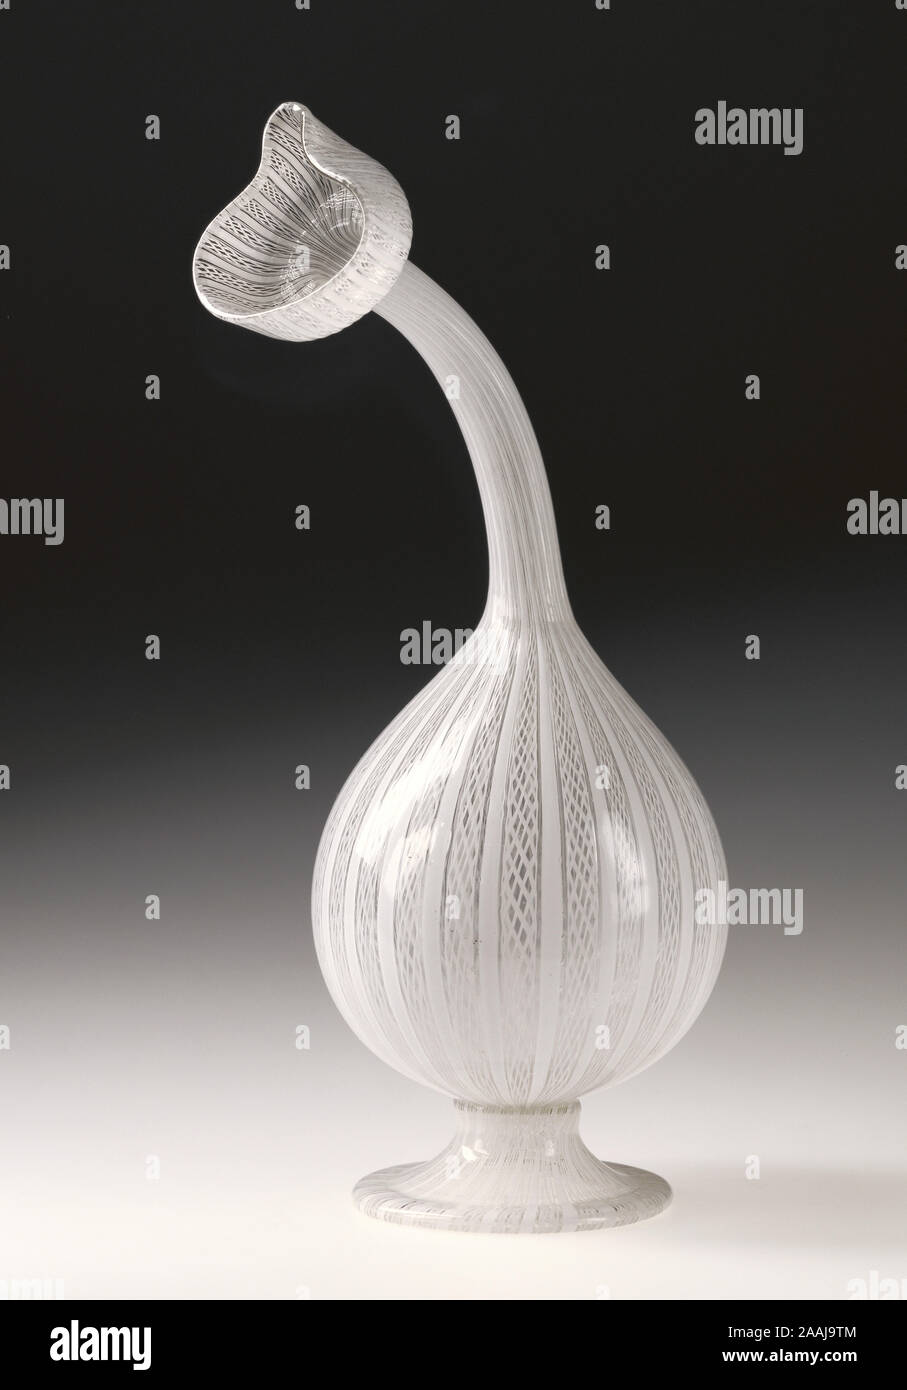 Filigrana Bottle (Kuttrolf); Unknown; Venice, Veneto, Italy; late 16th or early 17th century; Free- and mold-blown colorless (slightly gray) glass with lattimo canes; 23.8 cm (9 3/8 in.); 84.DK.661 Stock Photo